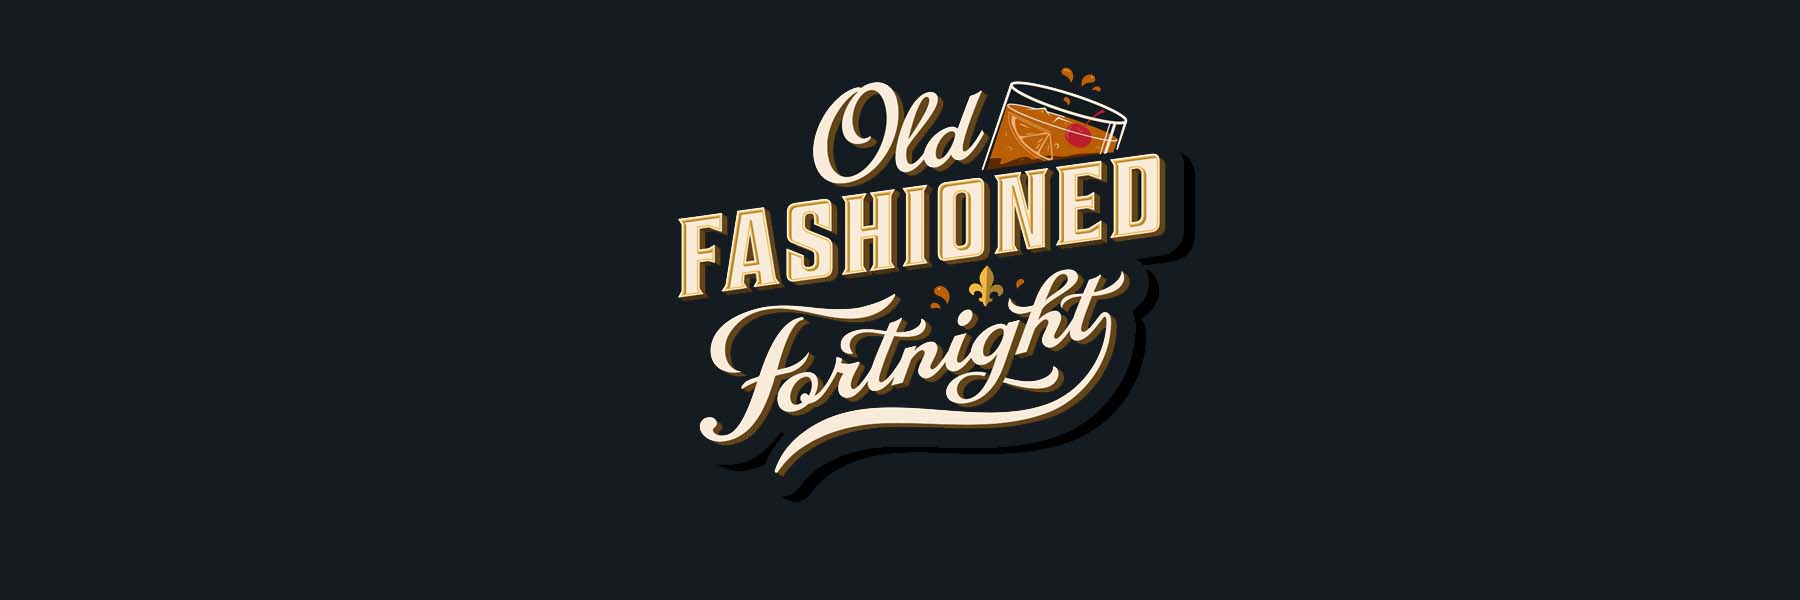 Old Fashioned Fortnight